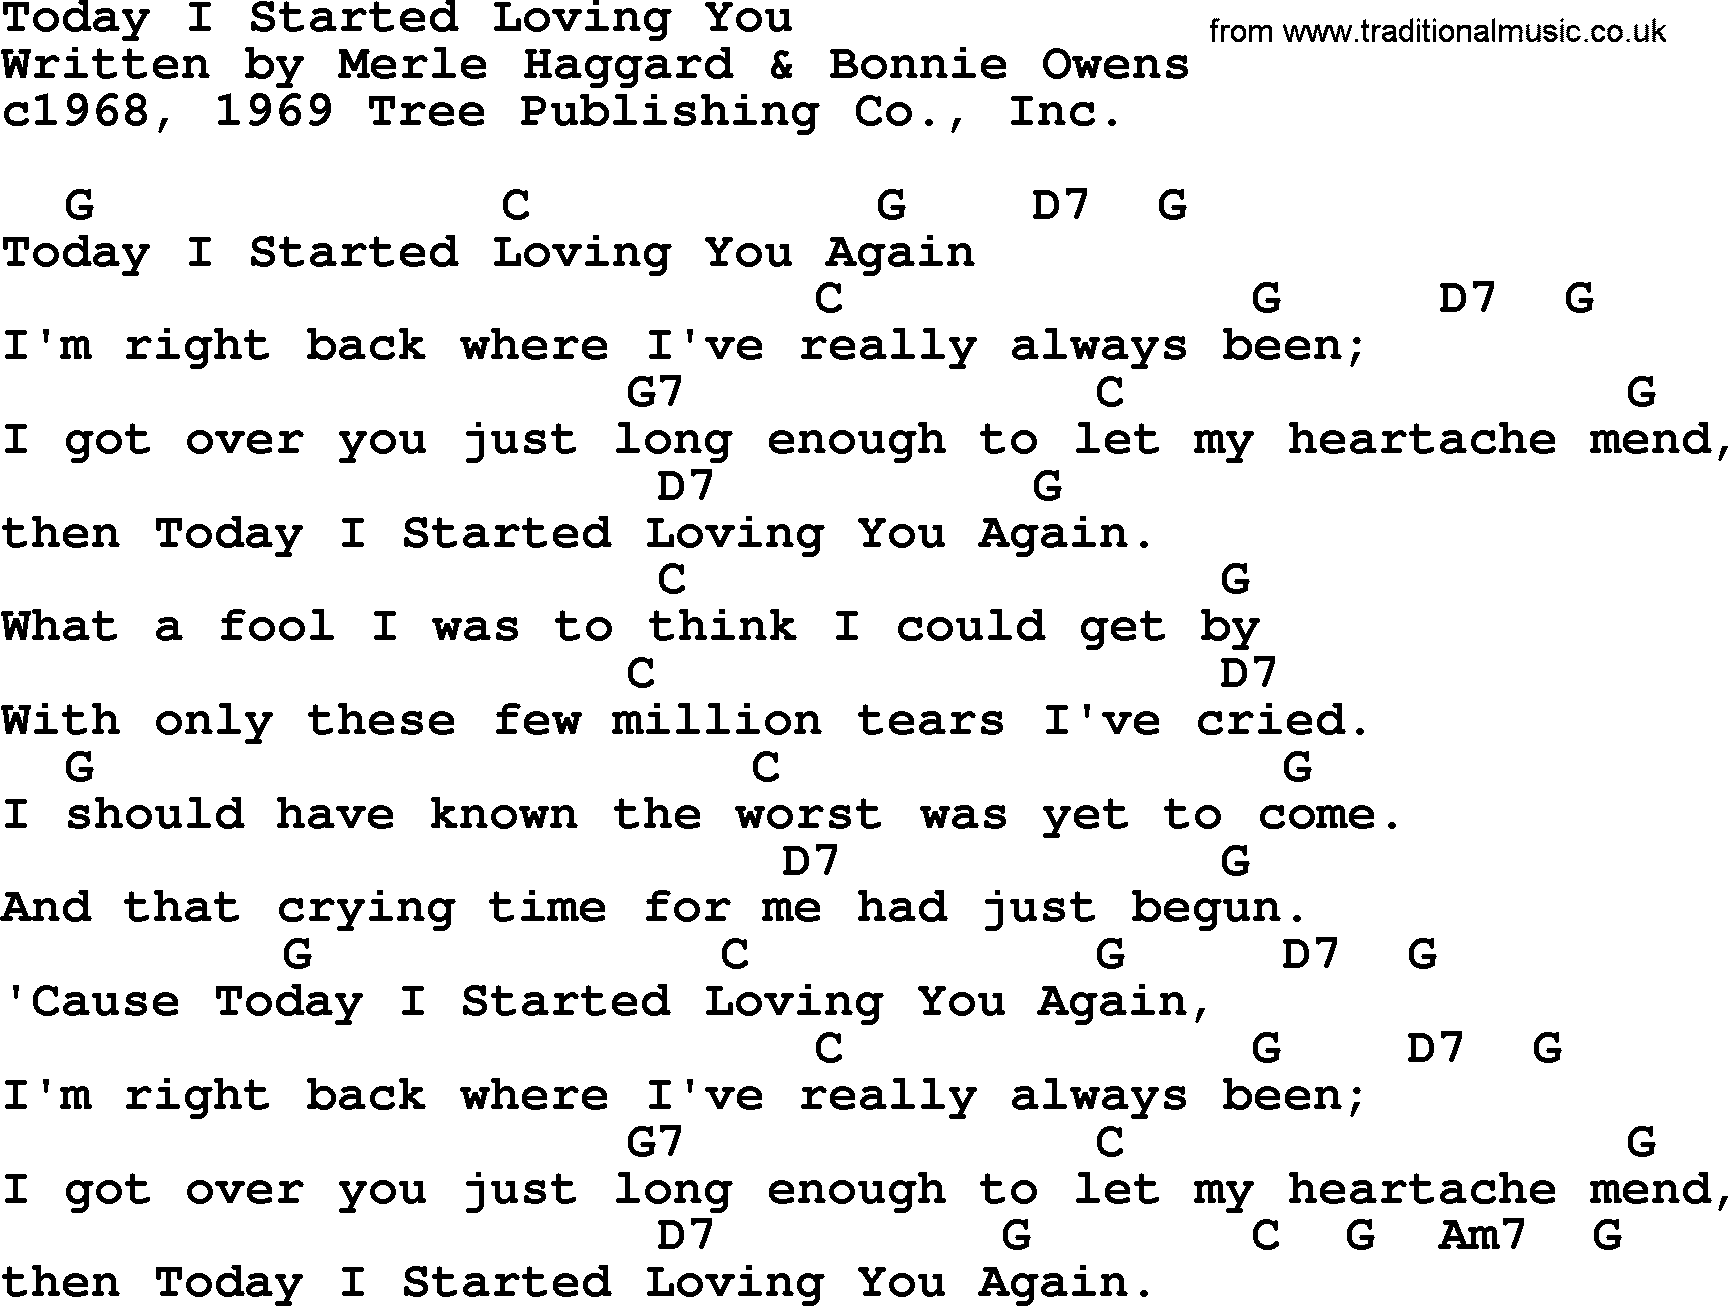 Merle Haggard song: Today I Started Loving You, lyrics and chords